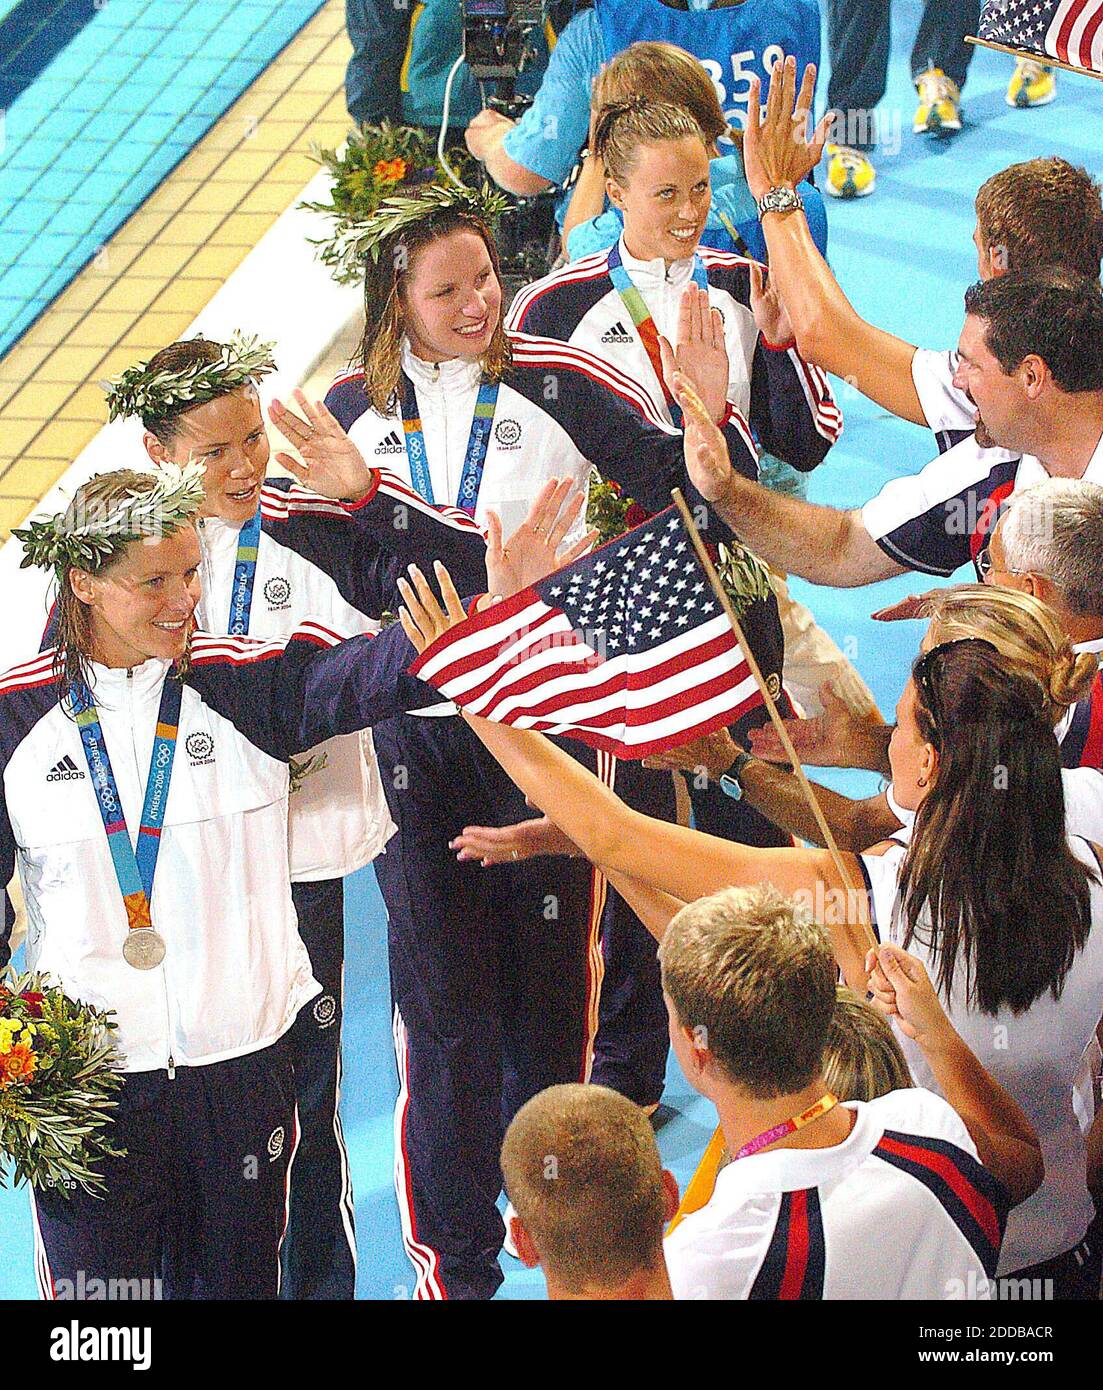 NO FILM, NO VIDEO, NO TV, NO DOCUMENTARY - Members of the U.S. women's 4x100 medley relay team celebrate winning the silver medal in the 2004 Olympic Games on Saturday, August 21, 2004, in Athens-Greece. Photo by Patrick Schneider/KRT/ABACA. Stock Photo